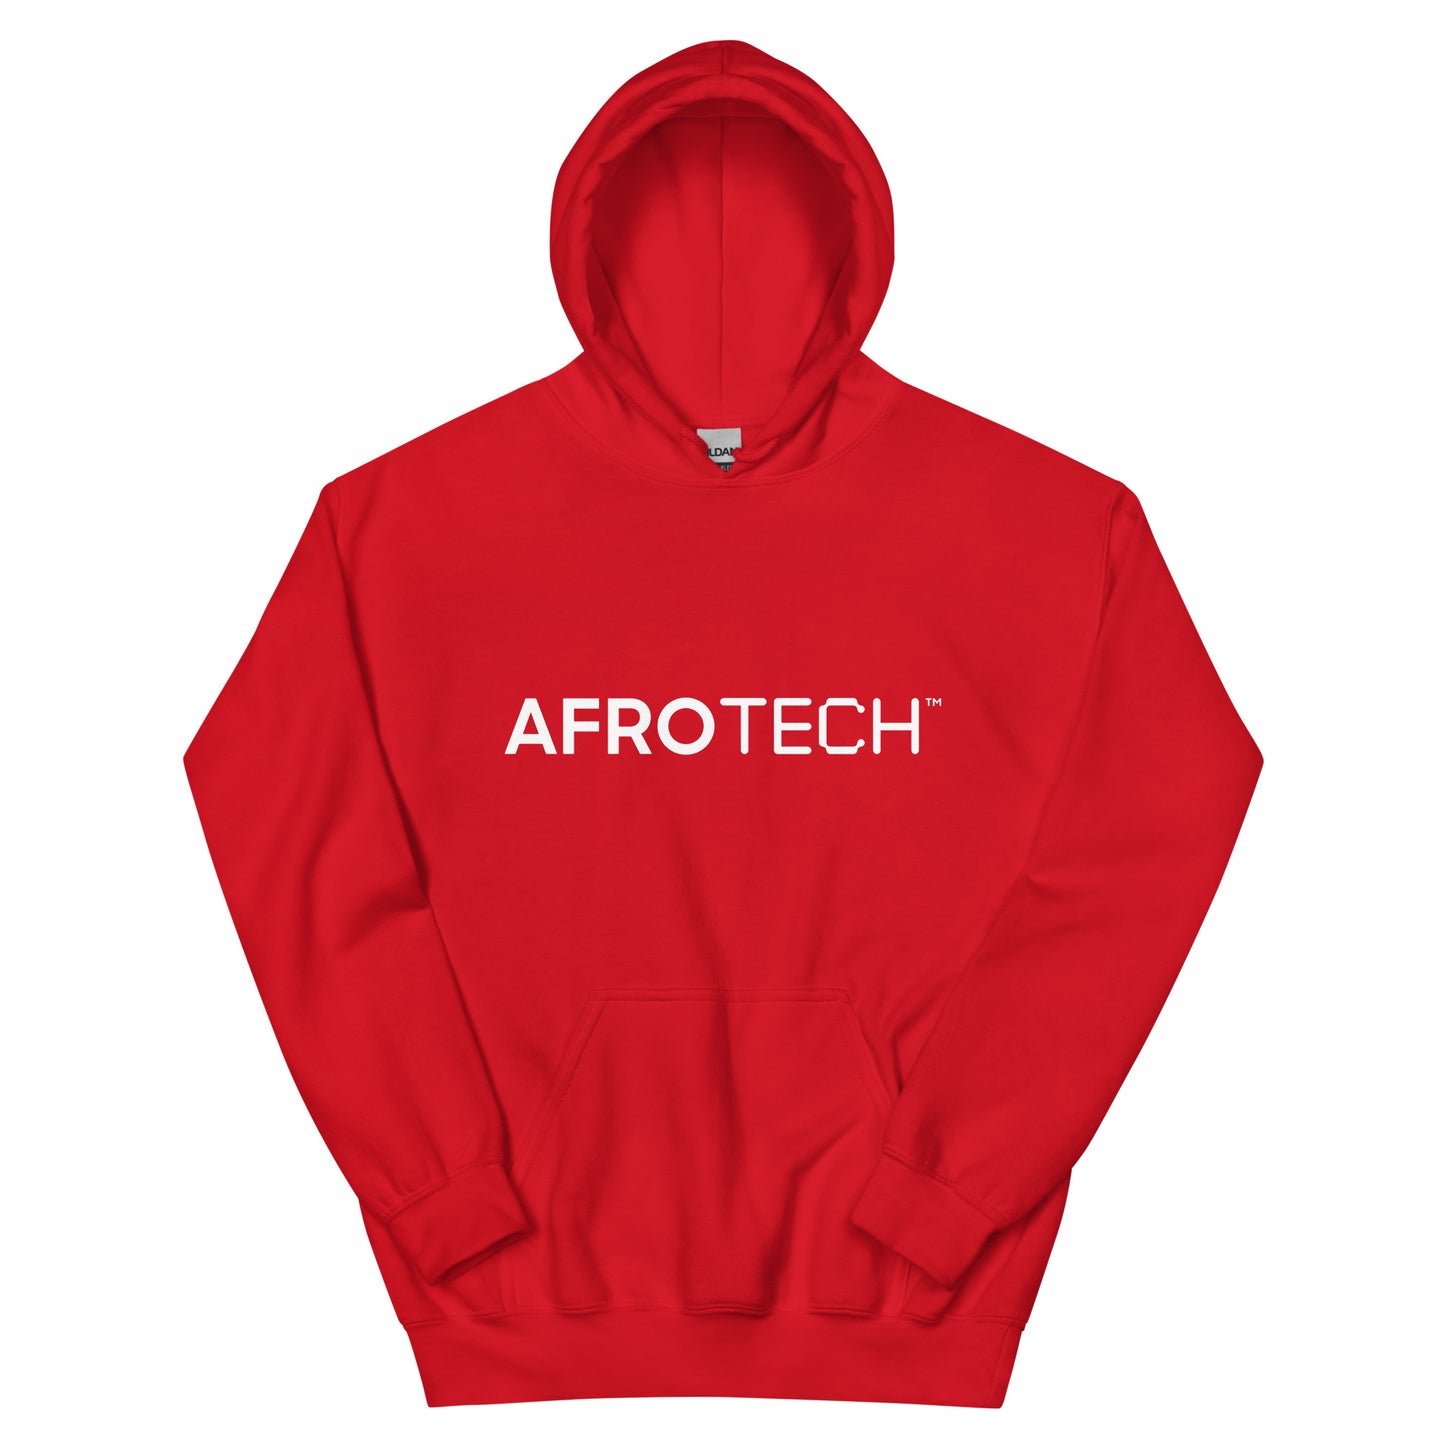 AfroTech Unisex Hoodie